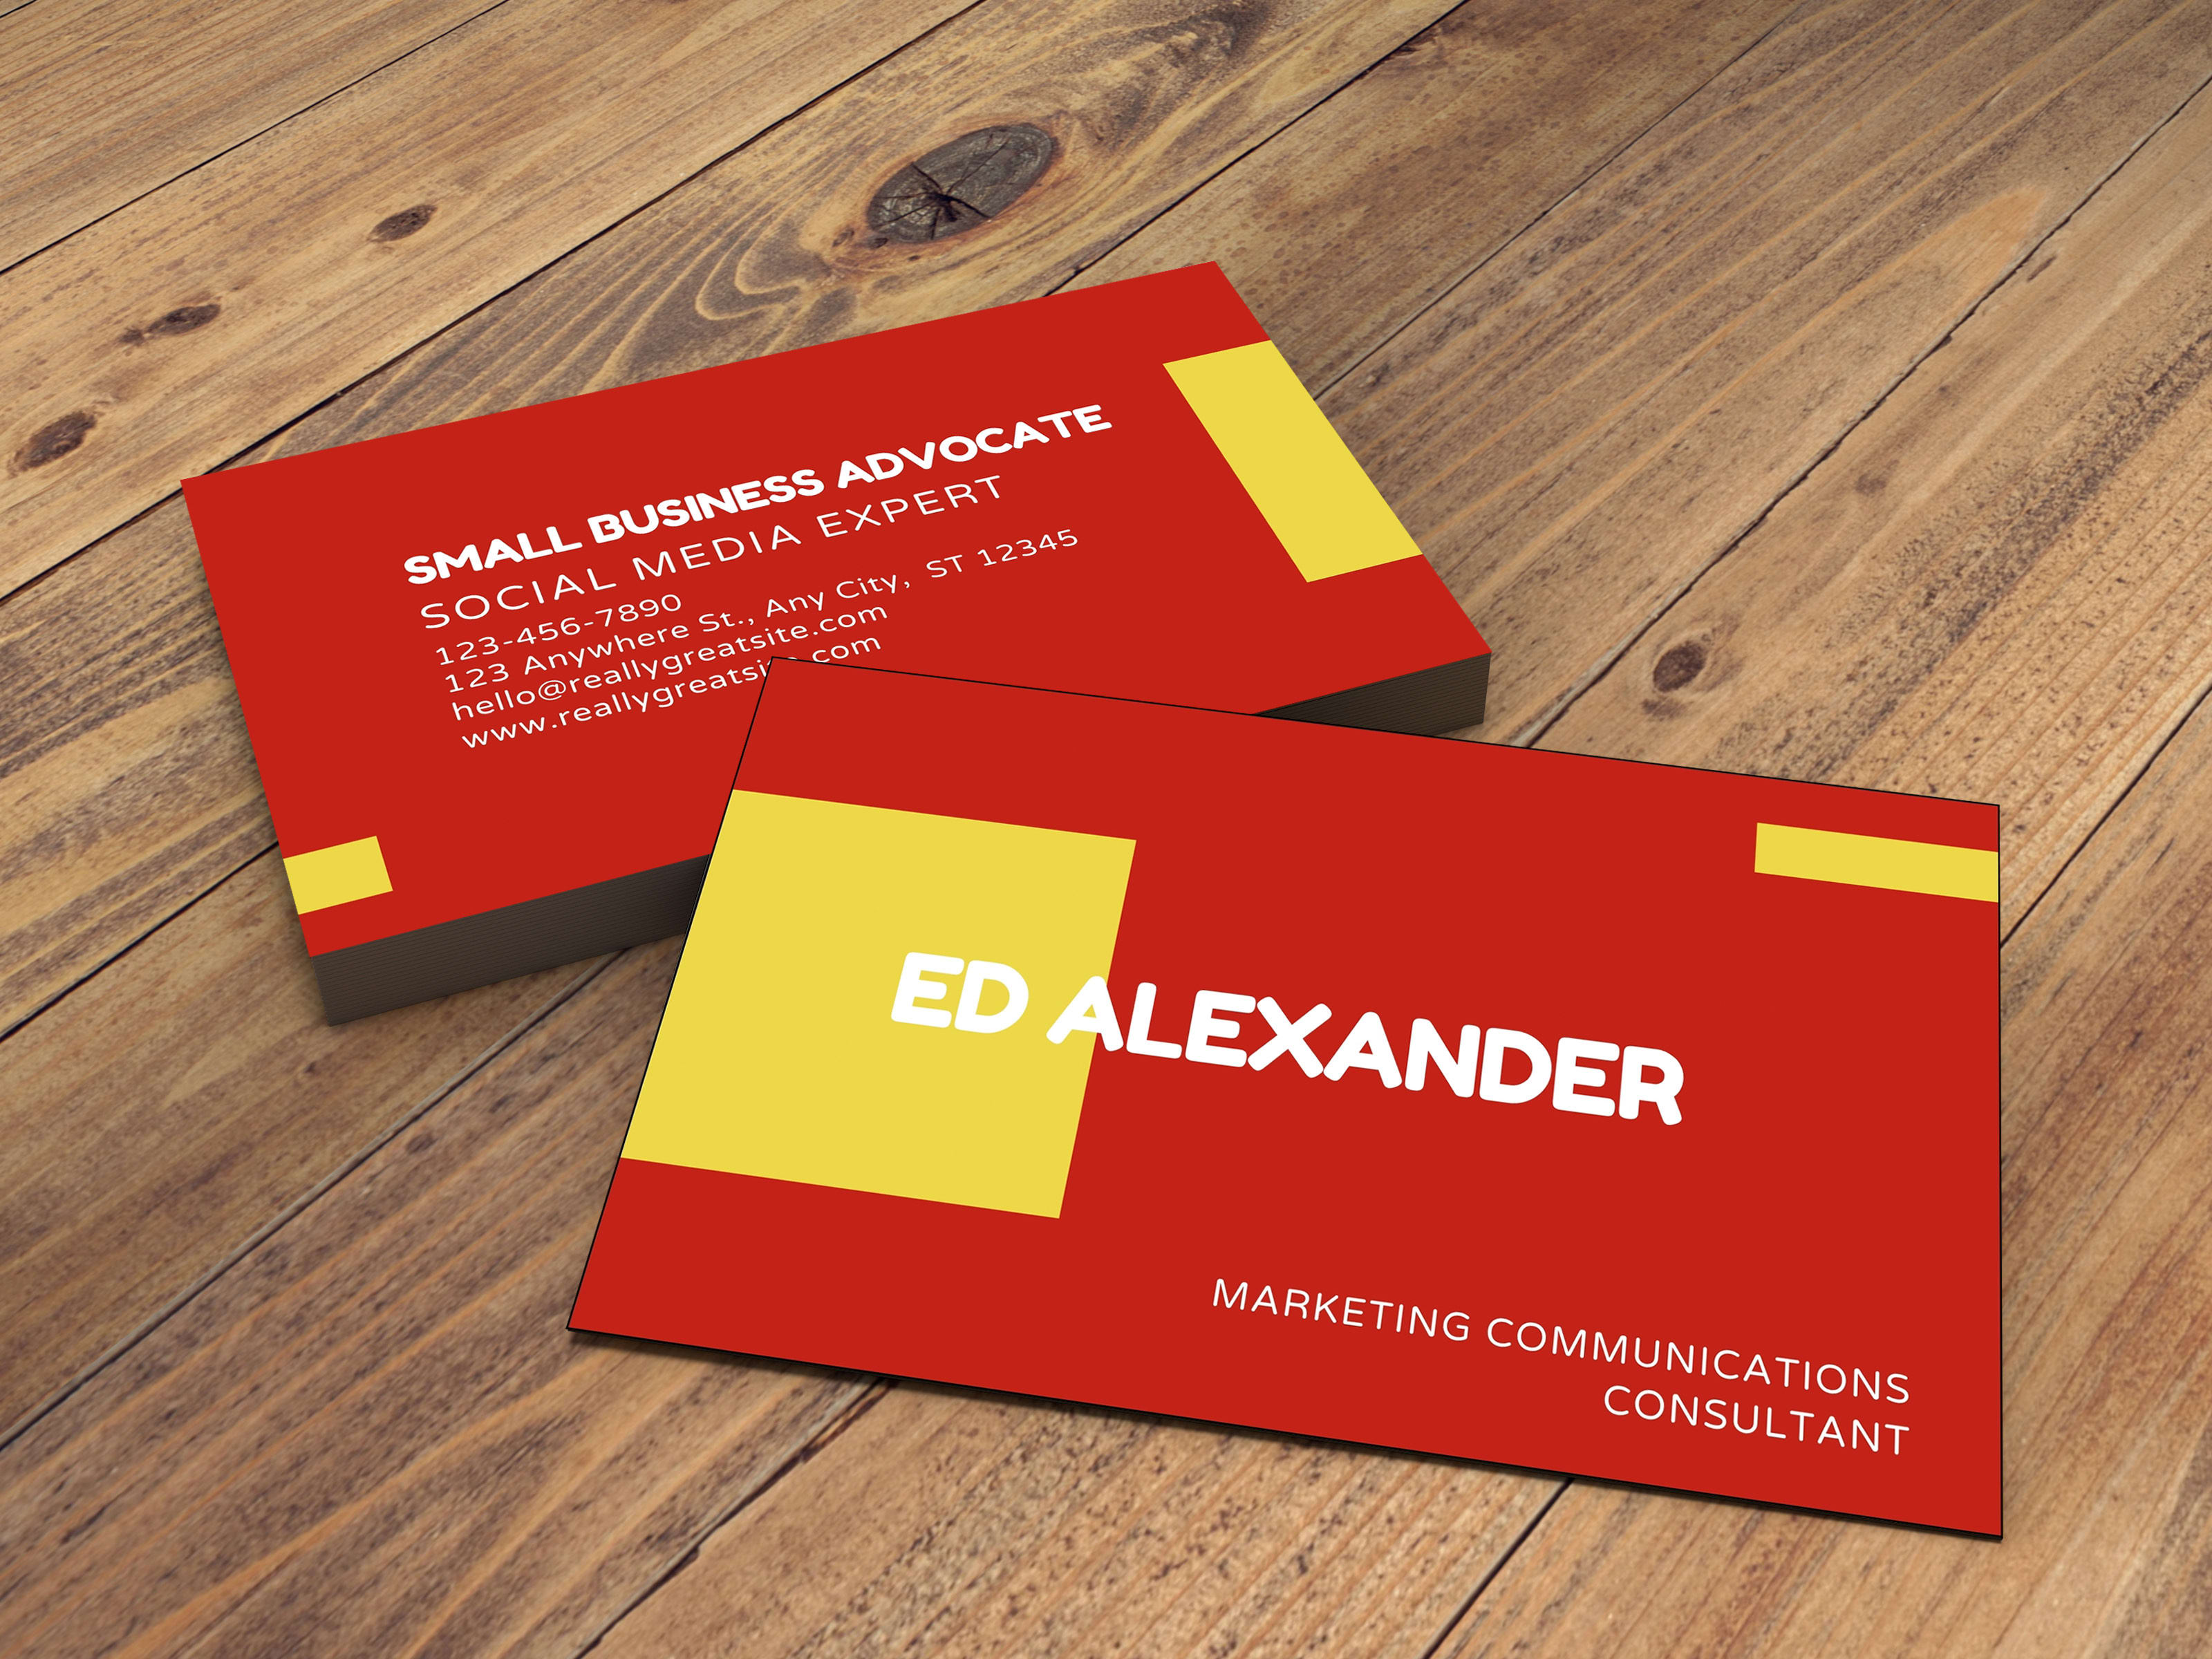 Design a professional business card 3 hour delivery by Design_builders |  Fiverr